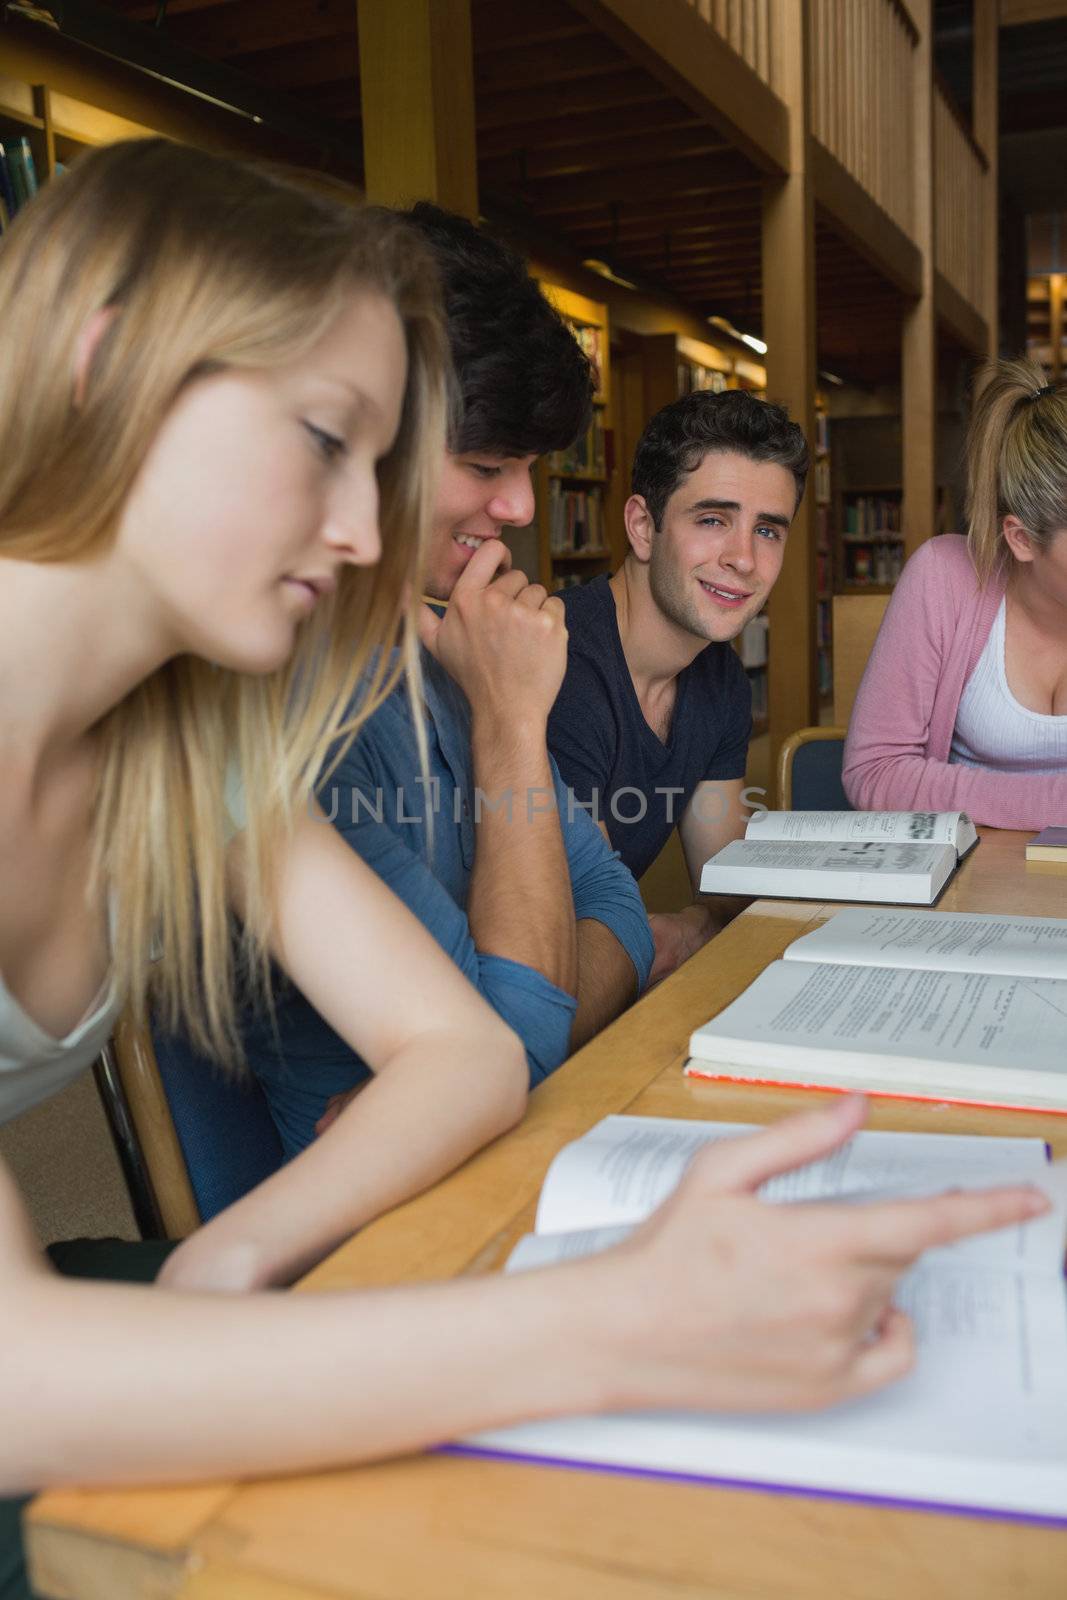 Students in the library in a study group by Wavebreakmedia